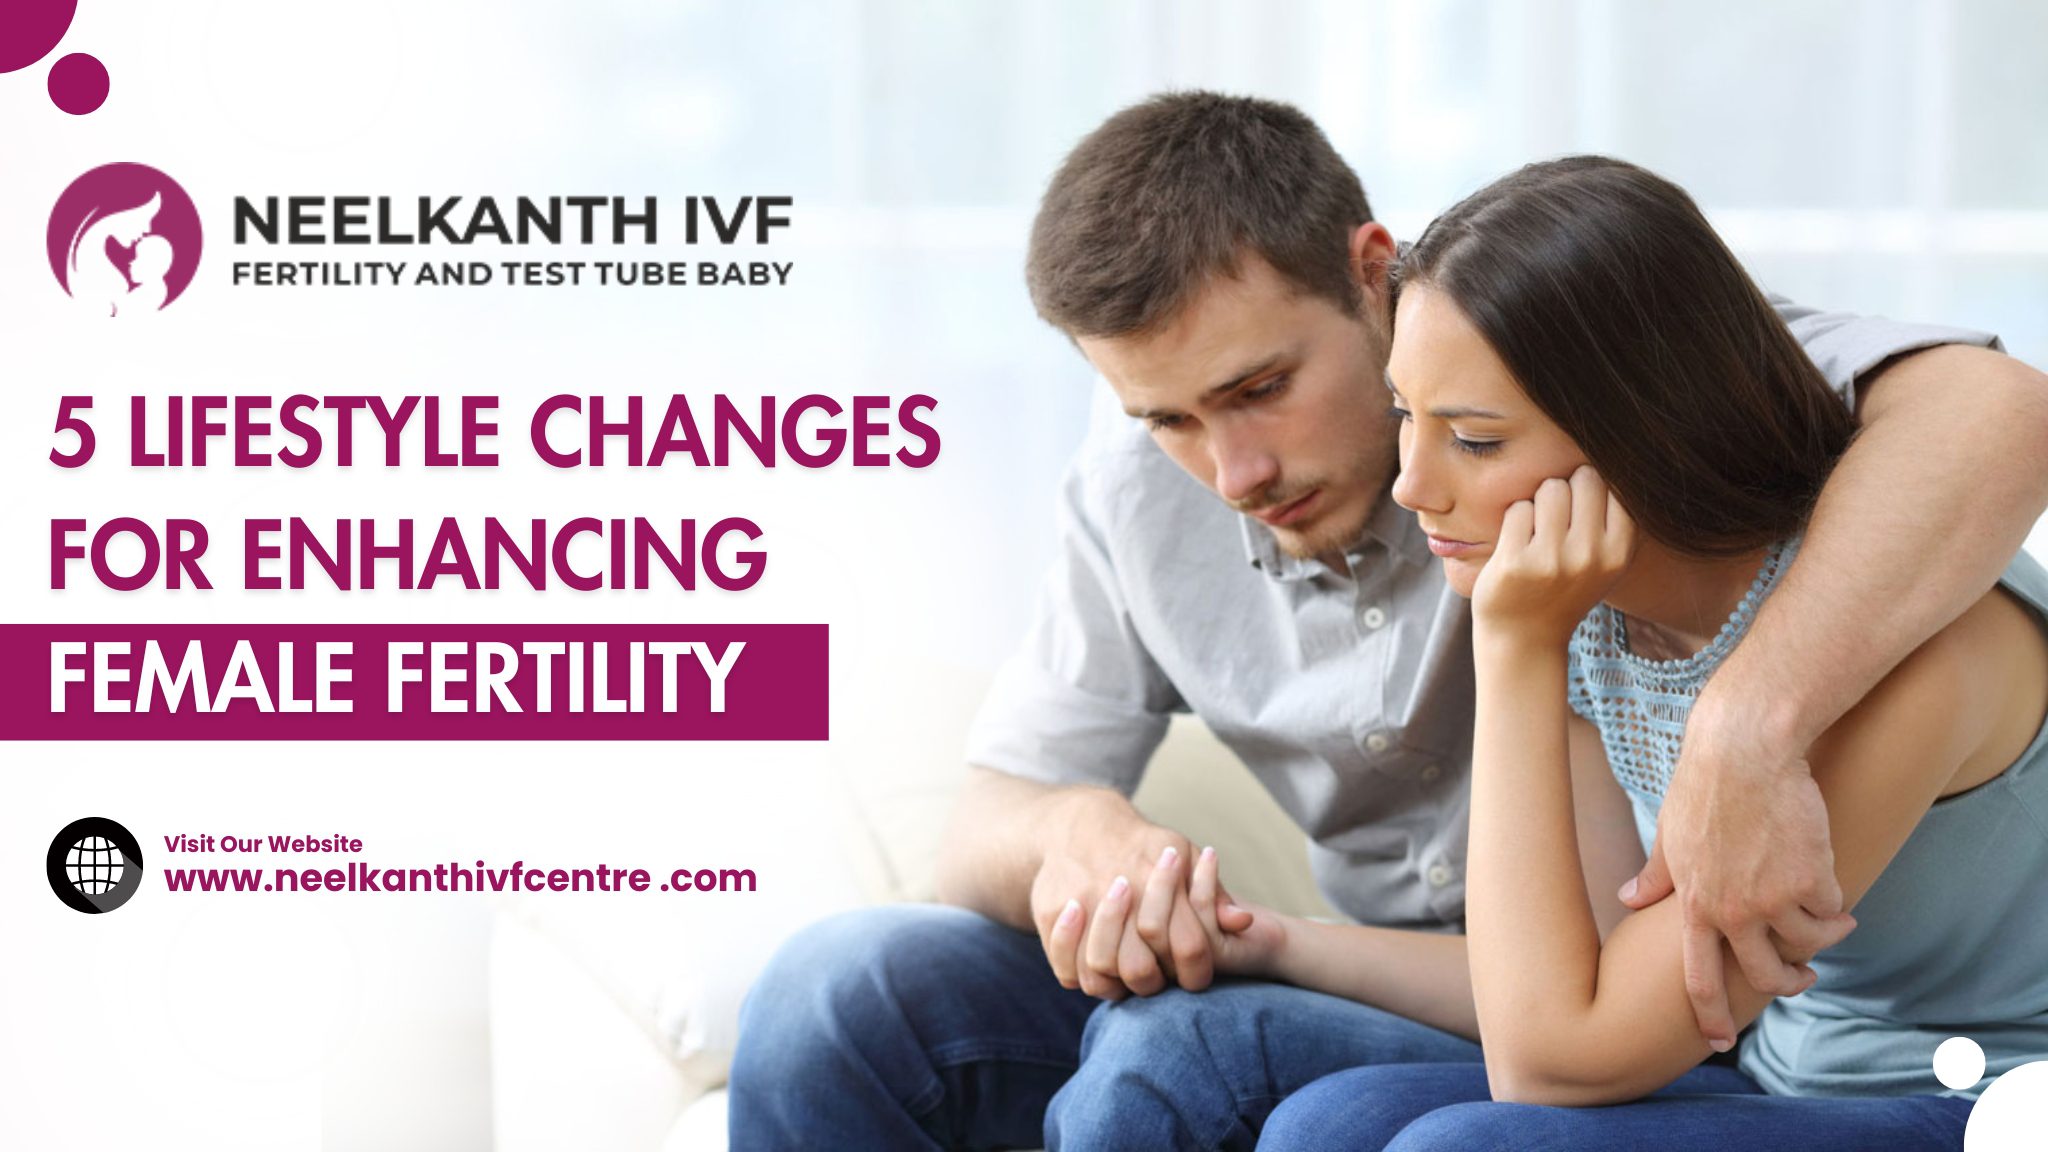 5 Lifestyle Changes For Enhancing Female Fertility